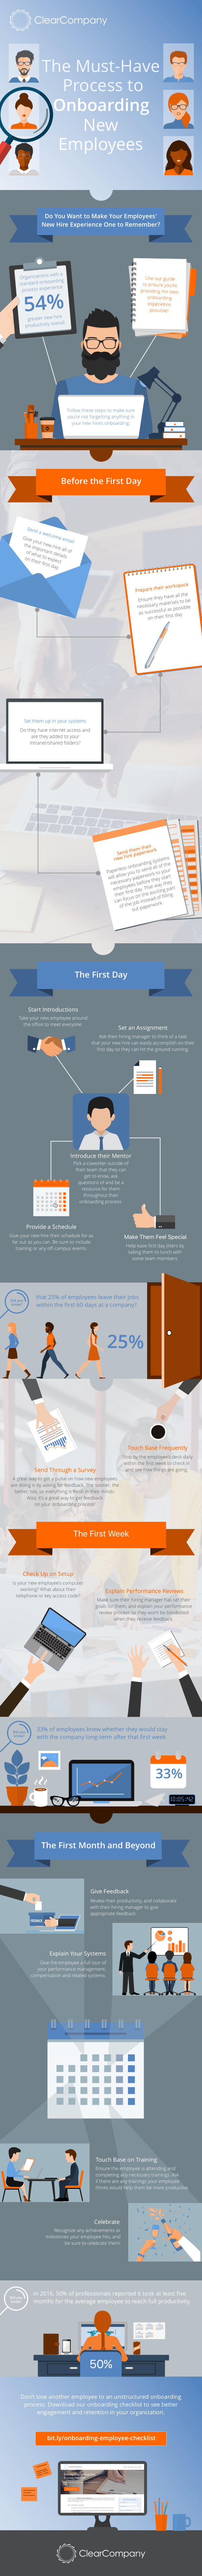 ClearCompany-The-Must-Have-Process-To-Onboarding-New-Employees_infographic.png